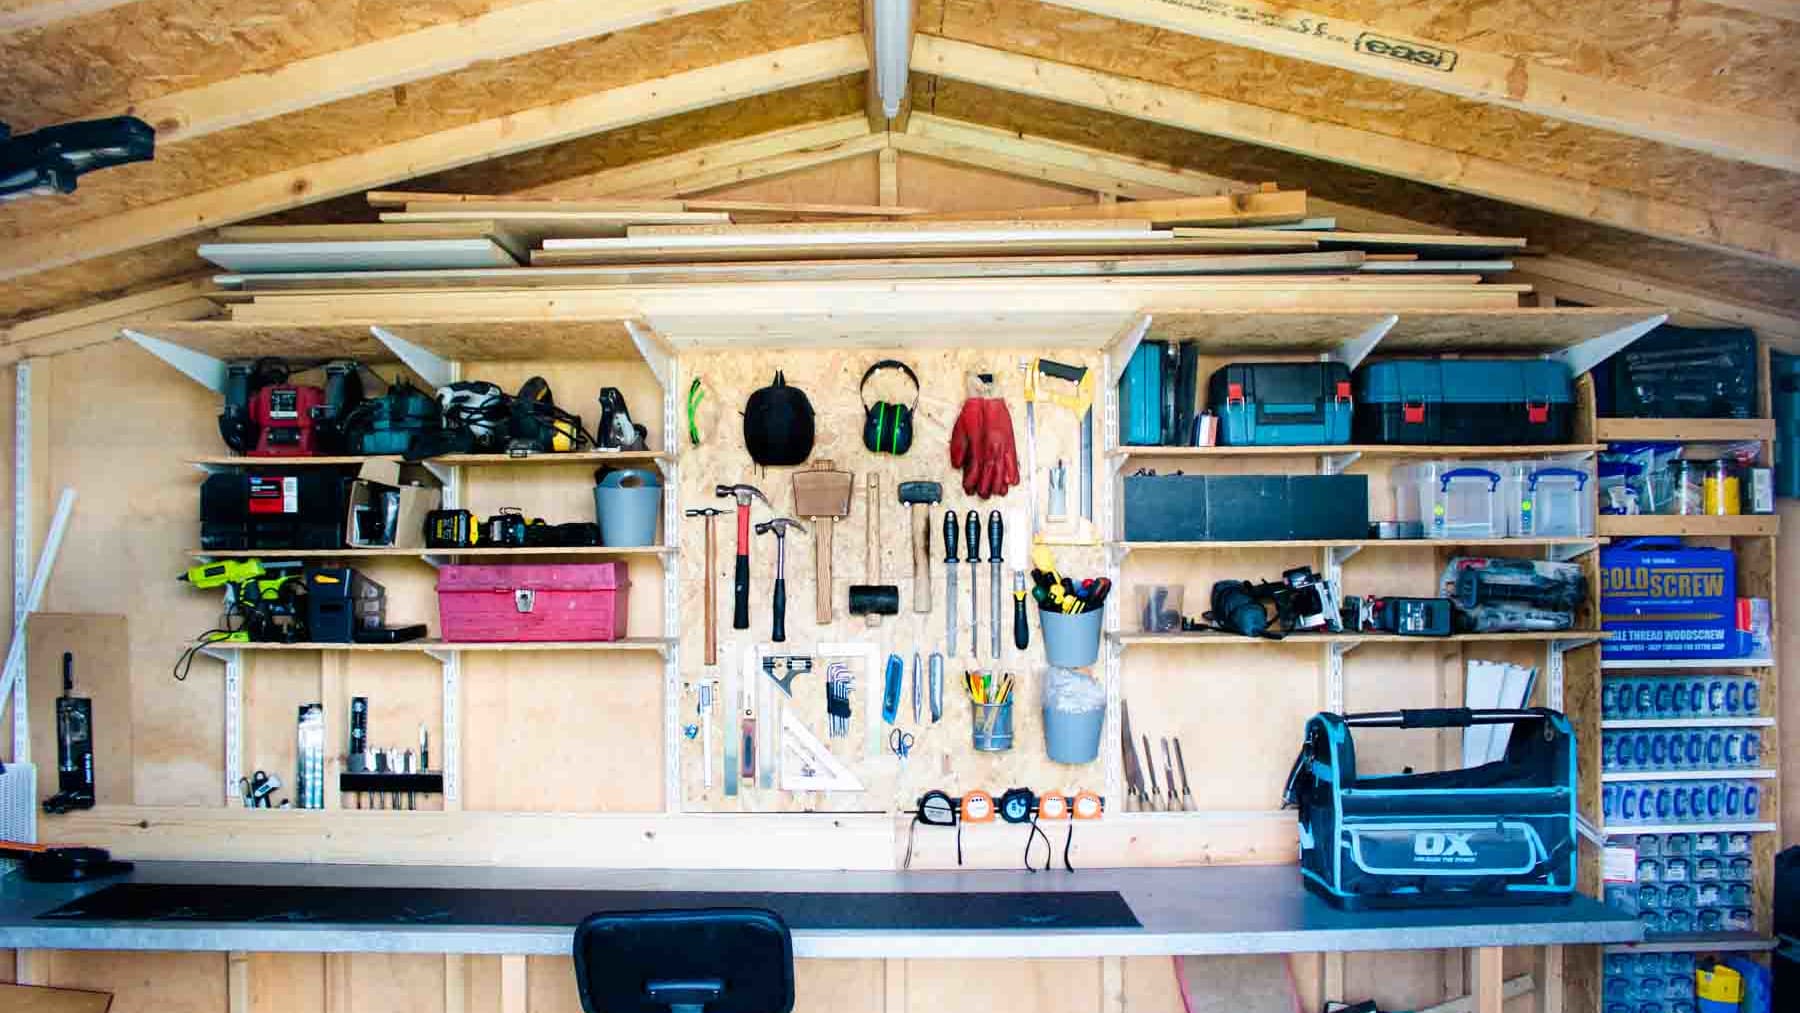 27 Organizing a Shed Ideas For Workshop Tools - The Carpenter's Daughter